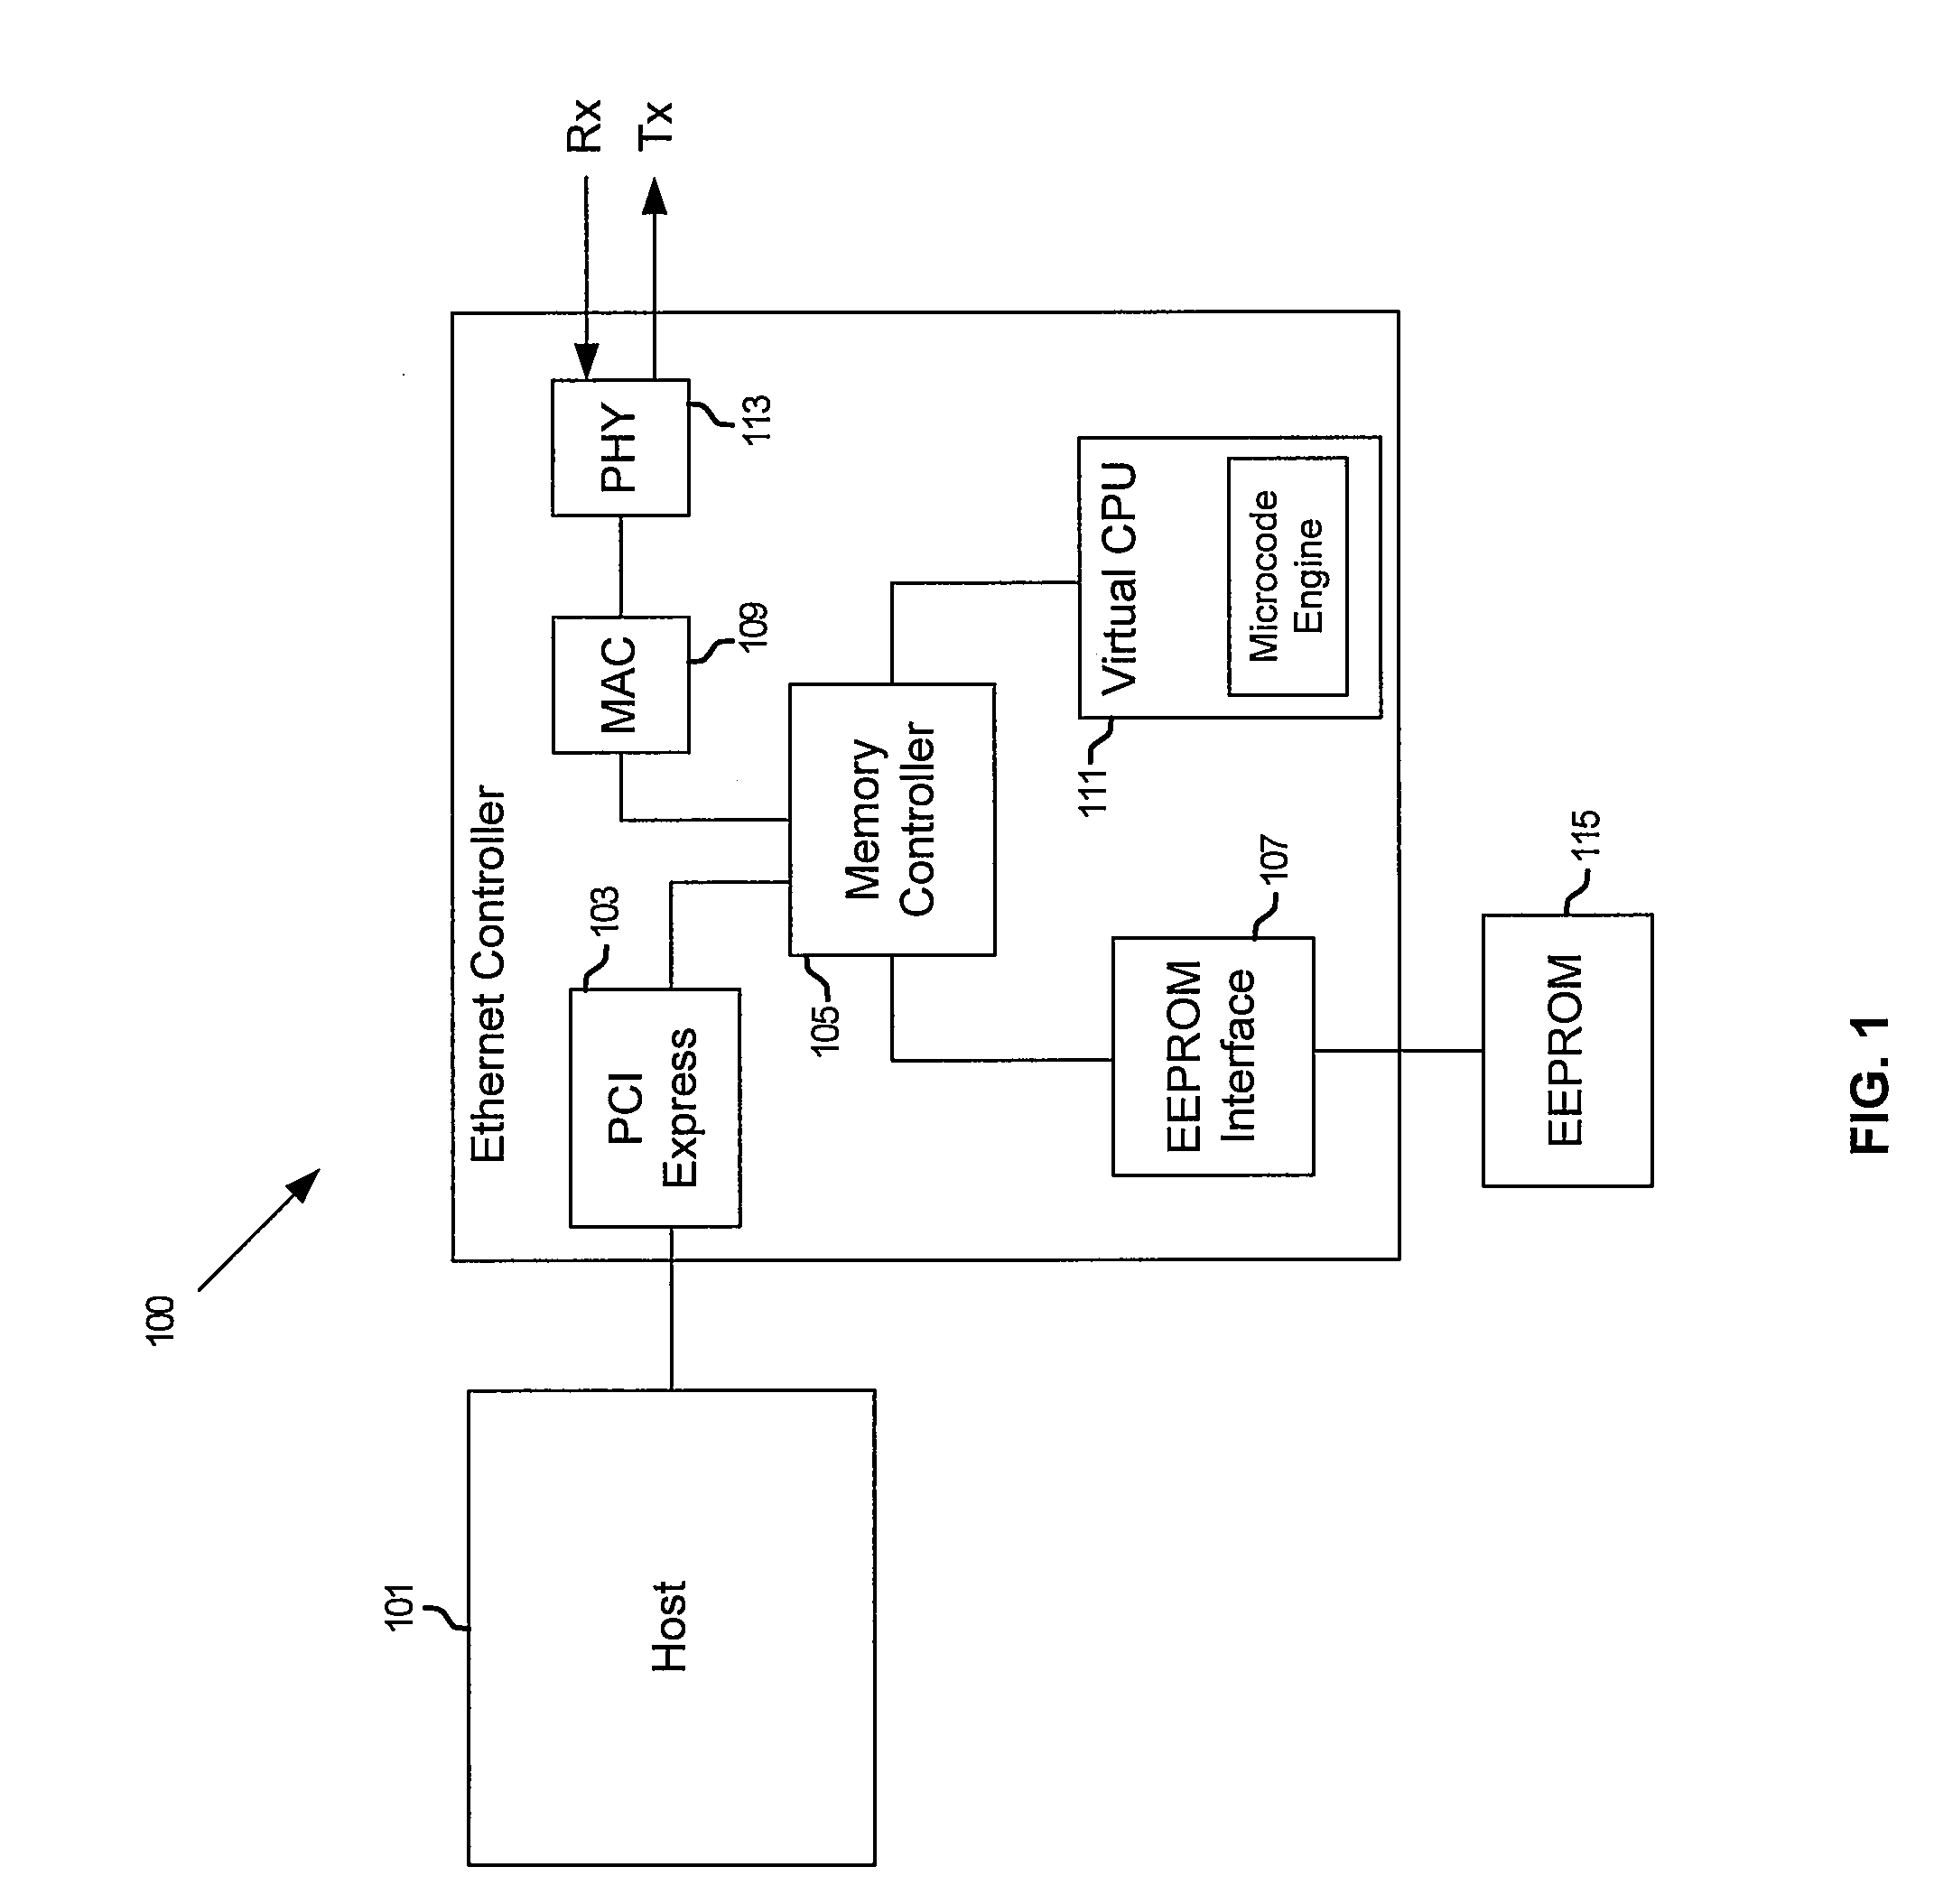 Method and system for fast ethernet controller operation using a virtual CPU